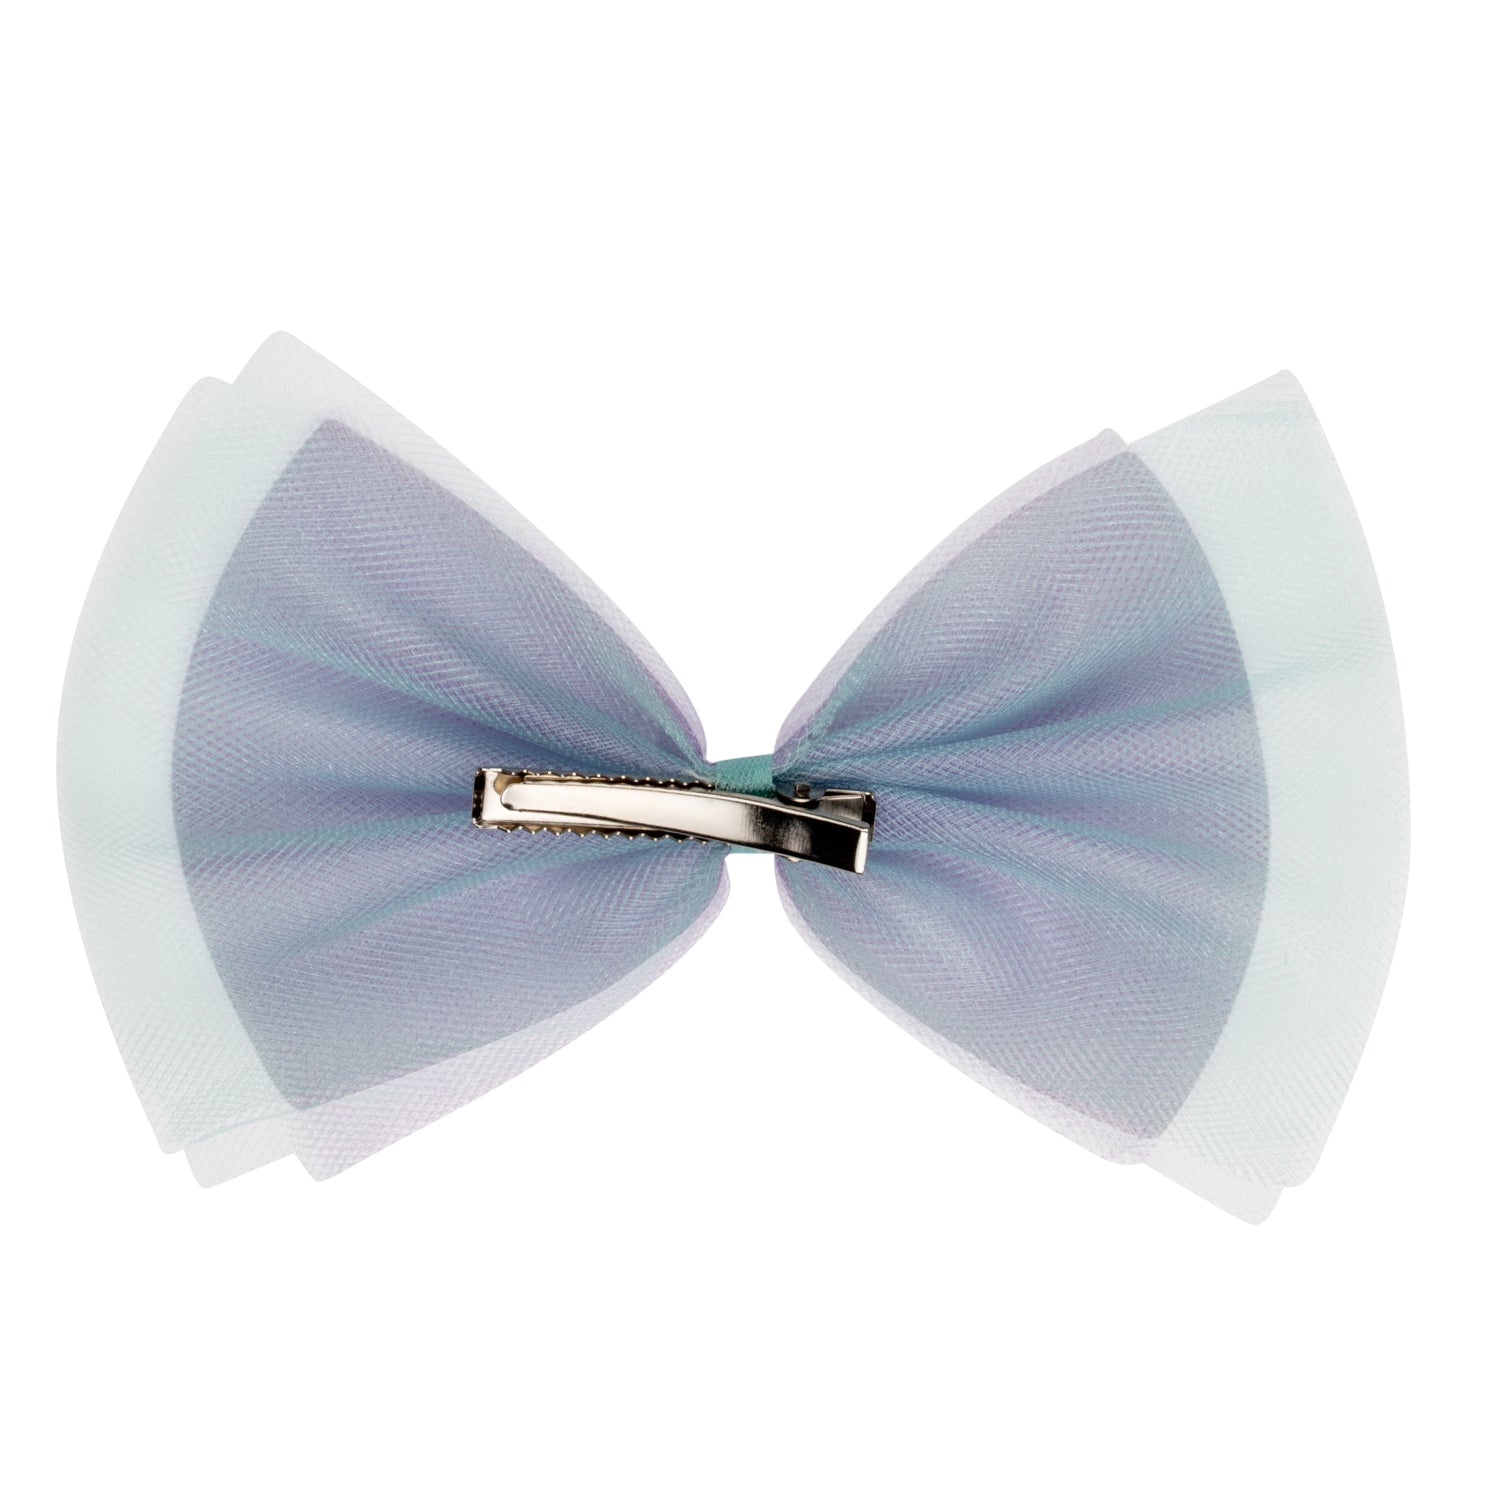 Lilac Tulle Bow Hairclip